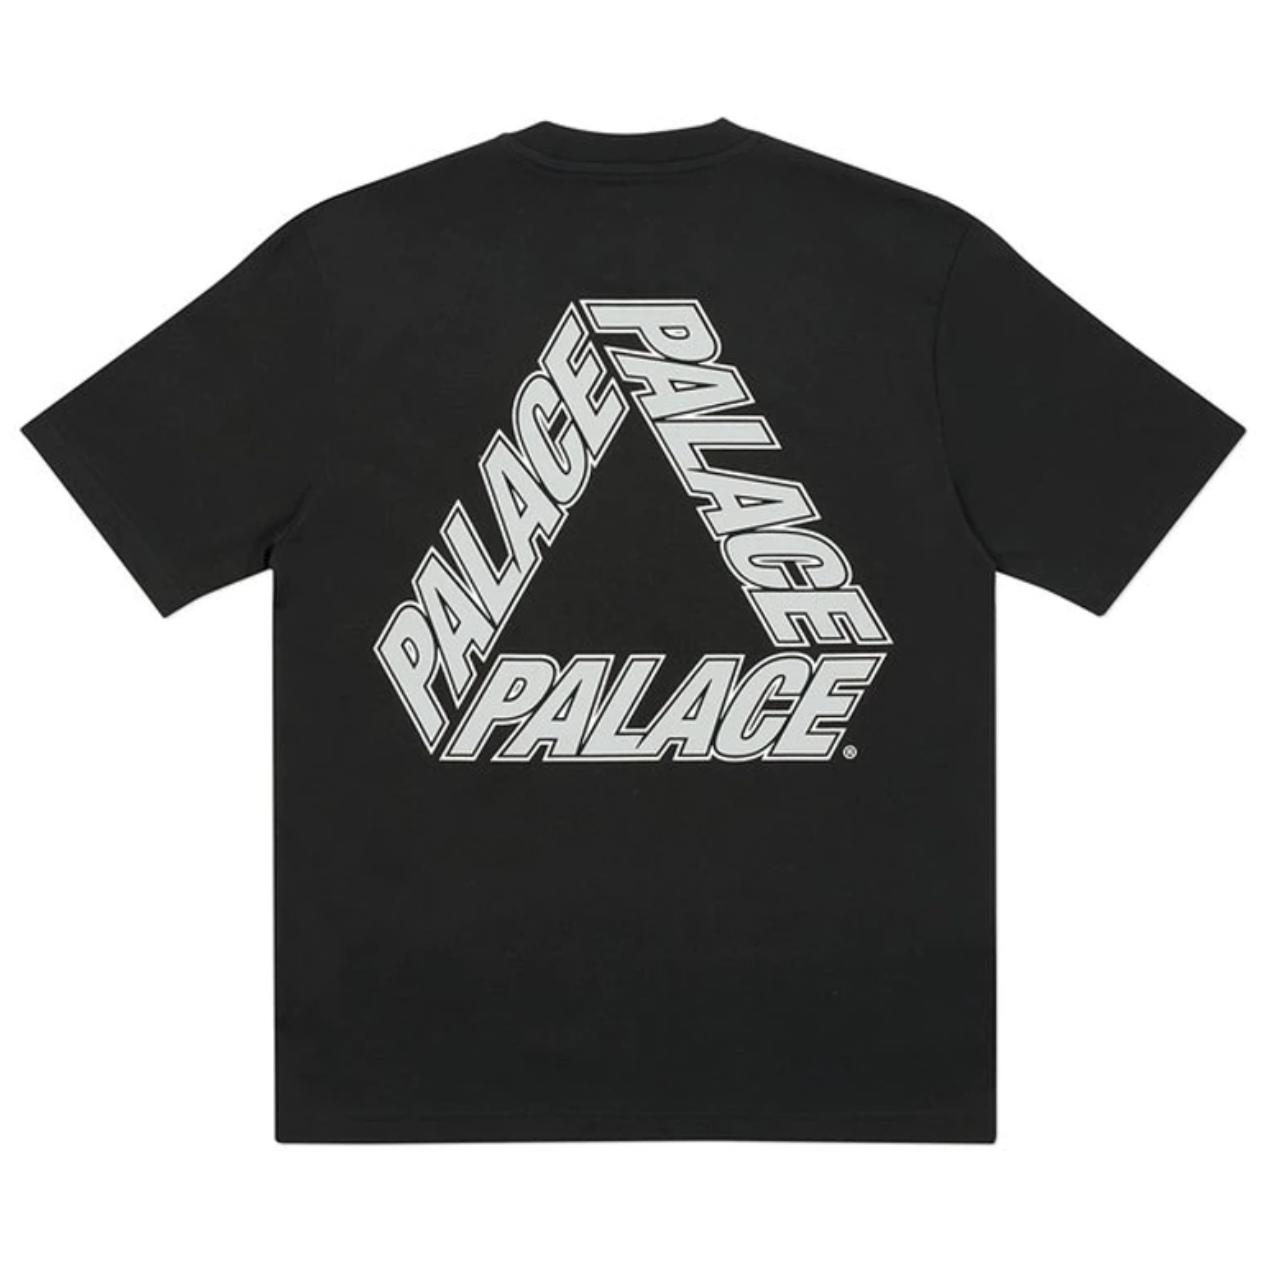 Palace P3 Team T-Shirt from Palace